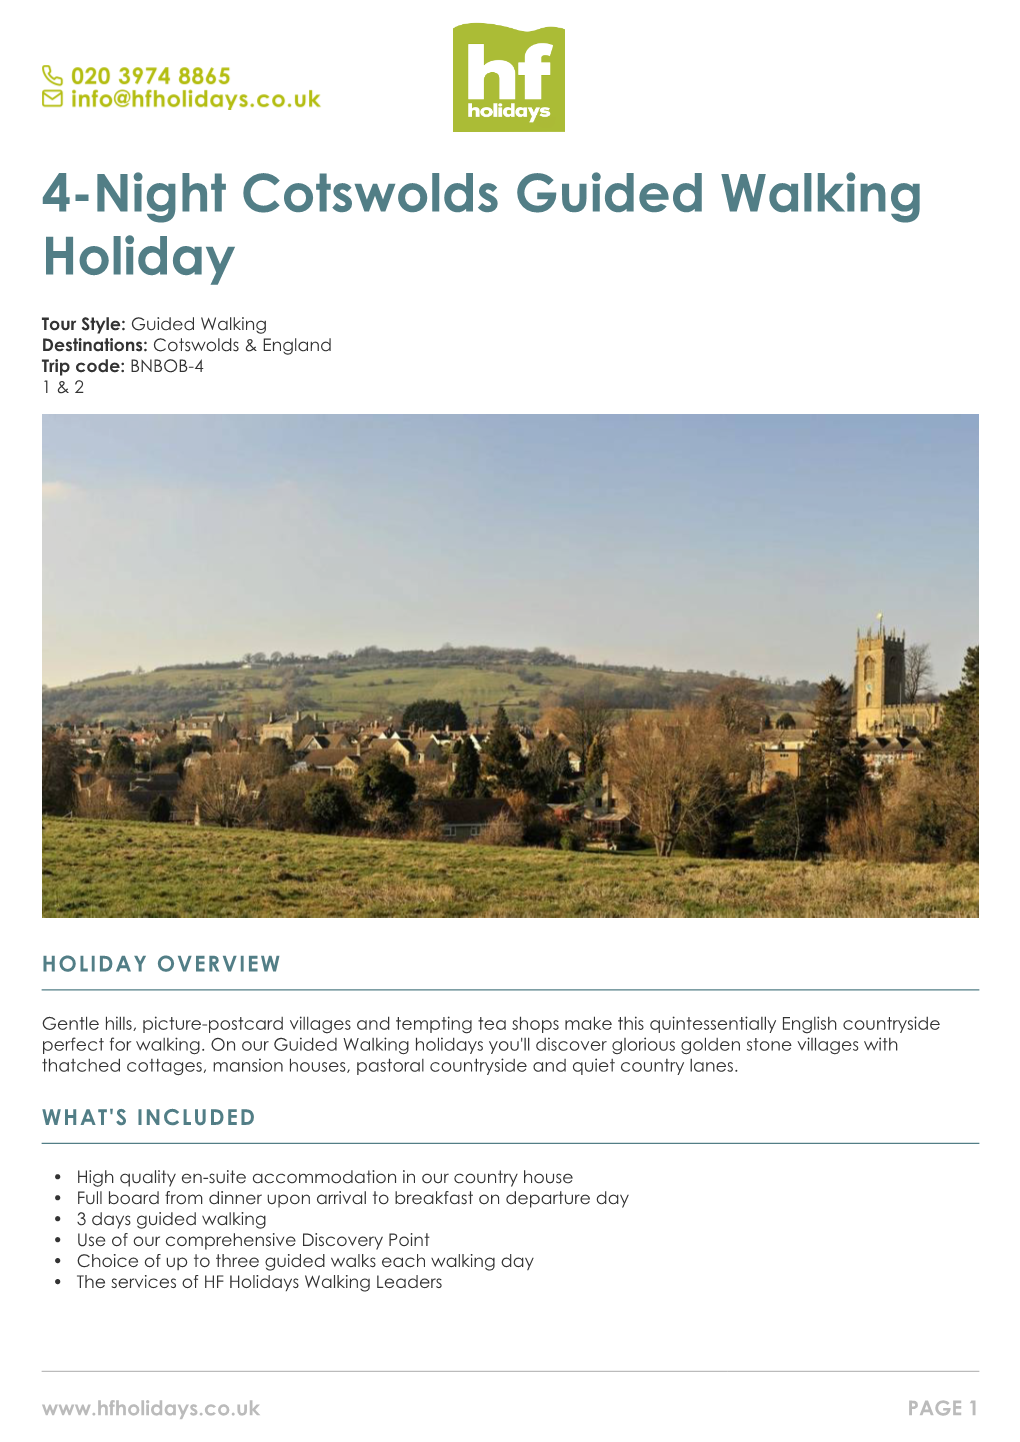 4-Night Cotswolds Guided Walking Holiday